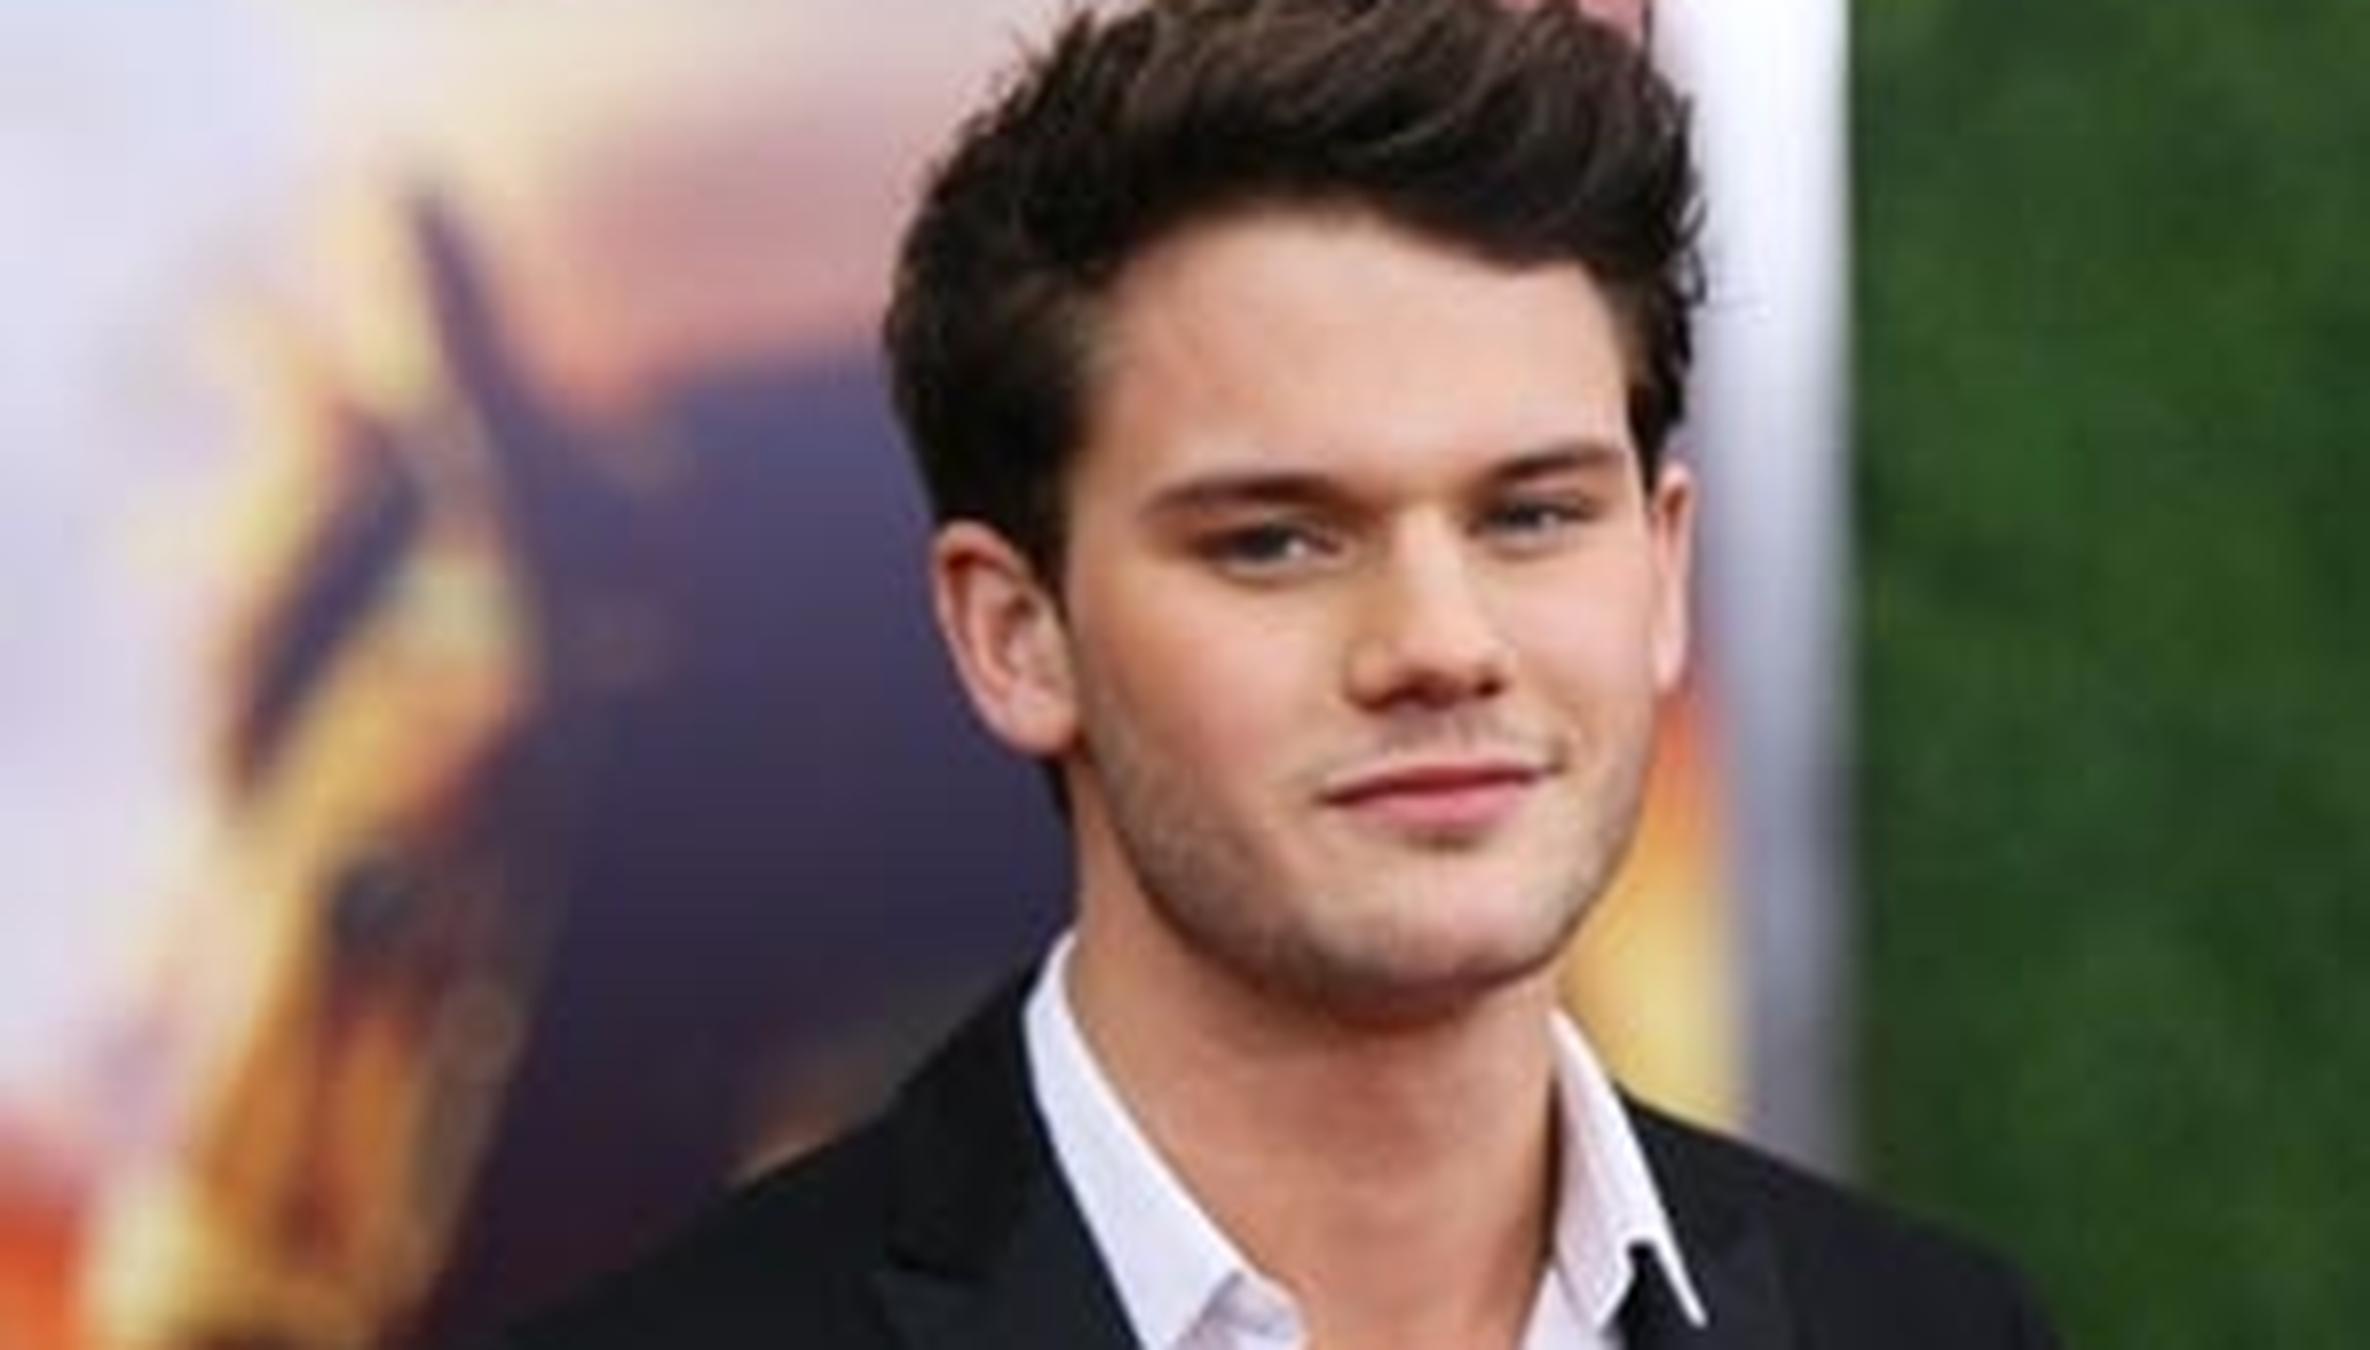 How to Become a Star In 1 Easy Lesson: 'War Horse's' Jeremy Irvine